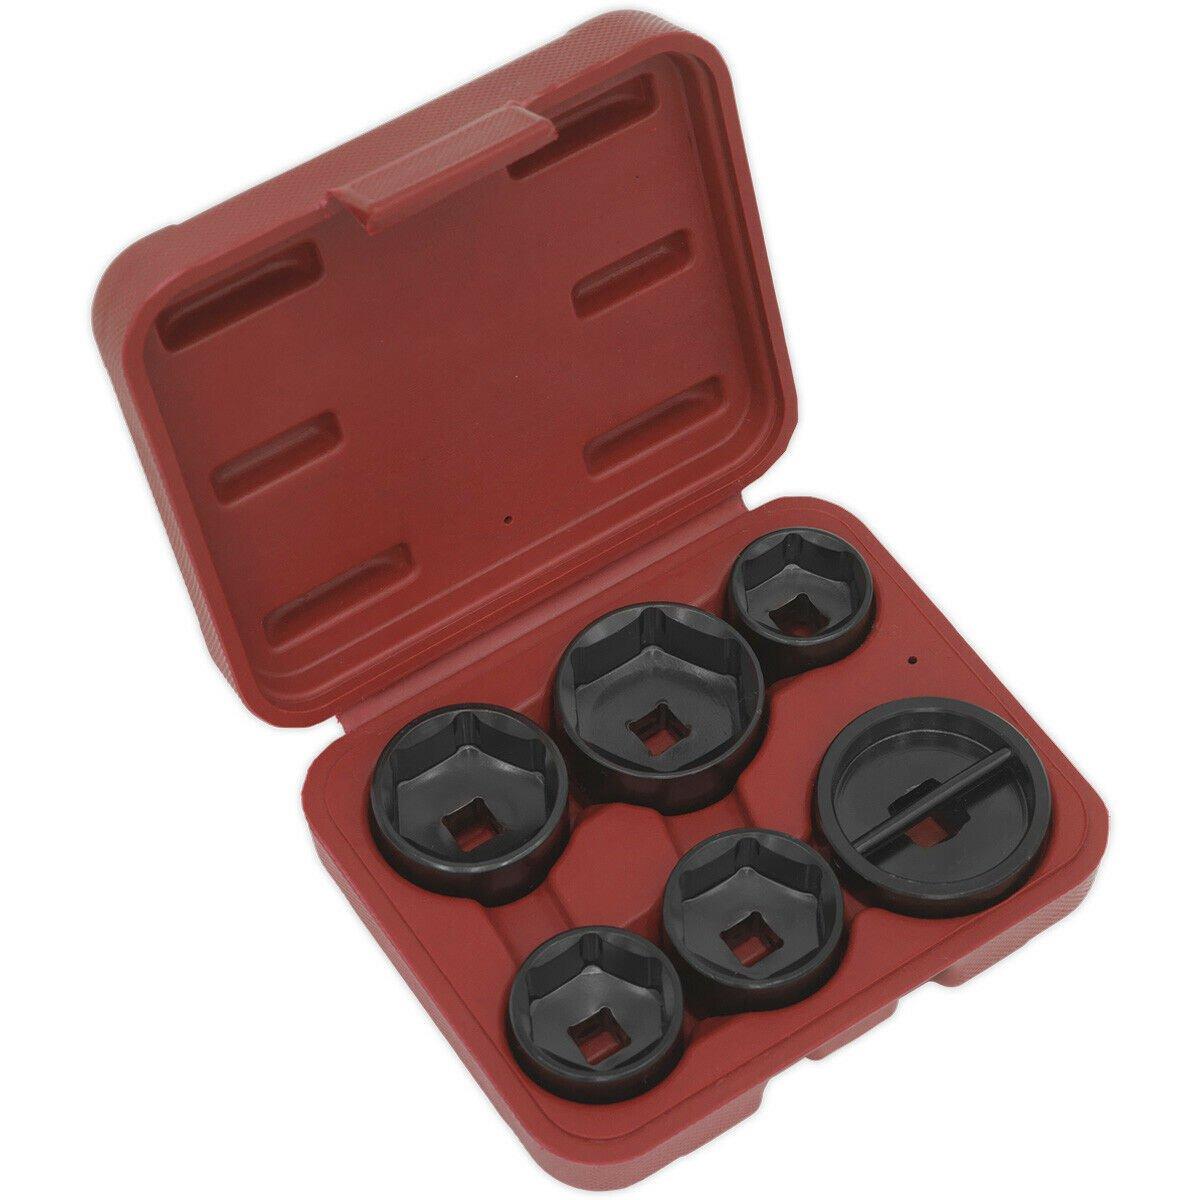 6 Piece Oil Filter Cap Wrench Set - 3/8